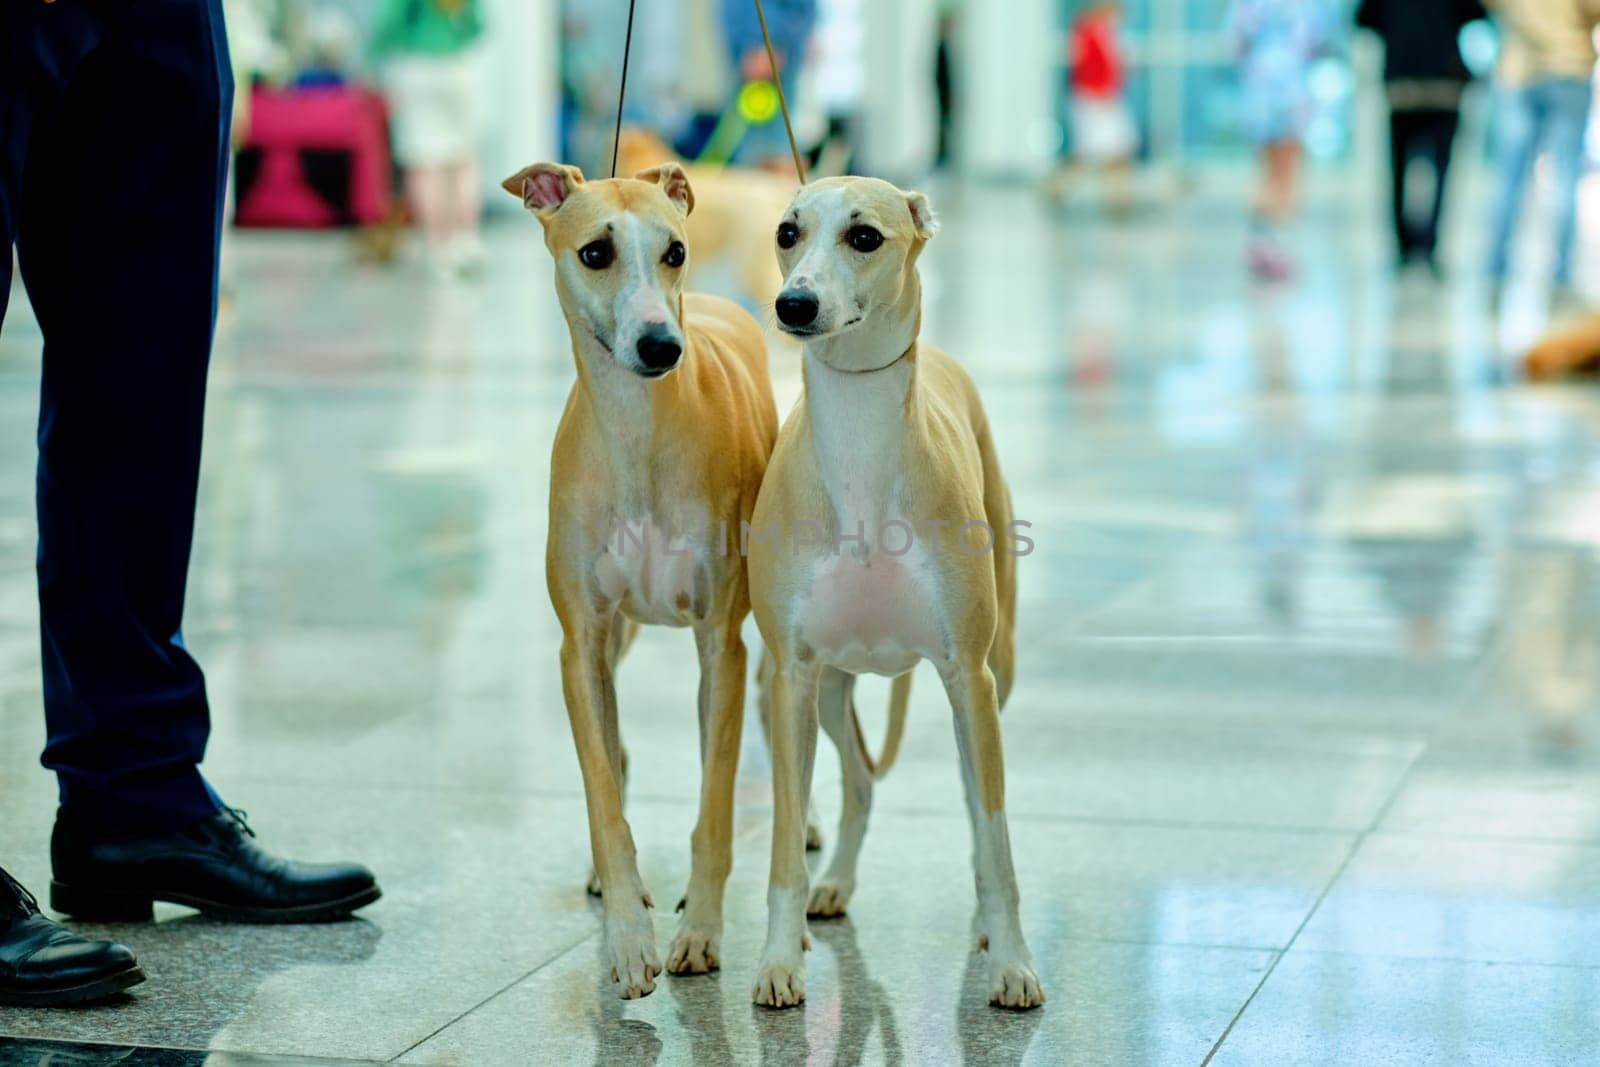 Two Whippet dogs are standing next to each other, the middle plan of the photo